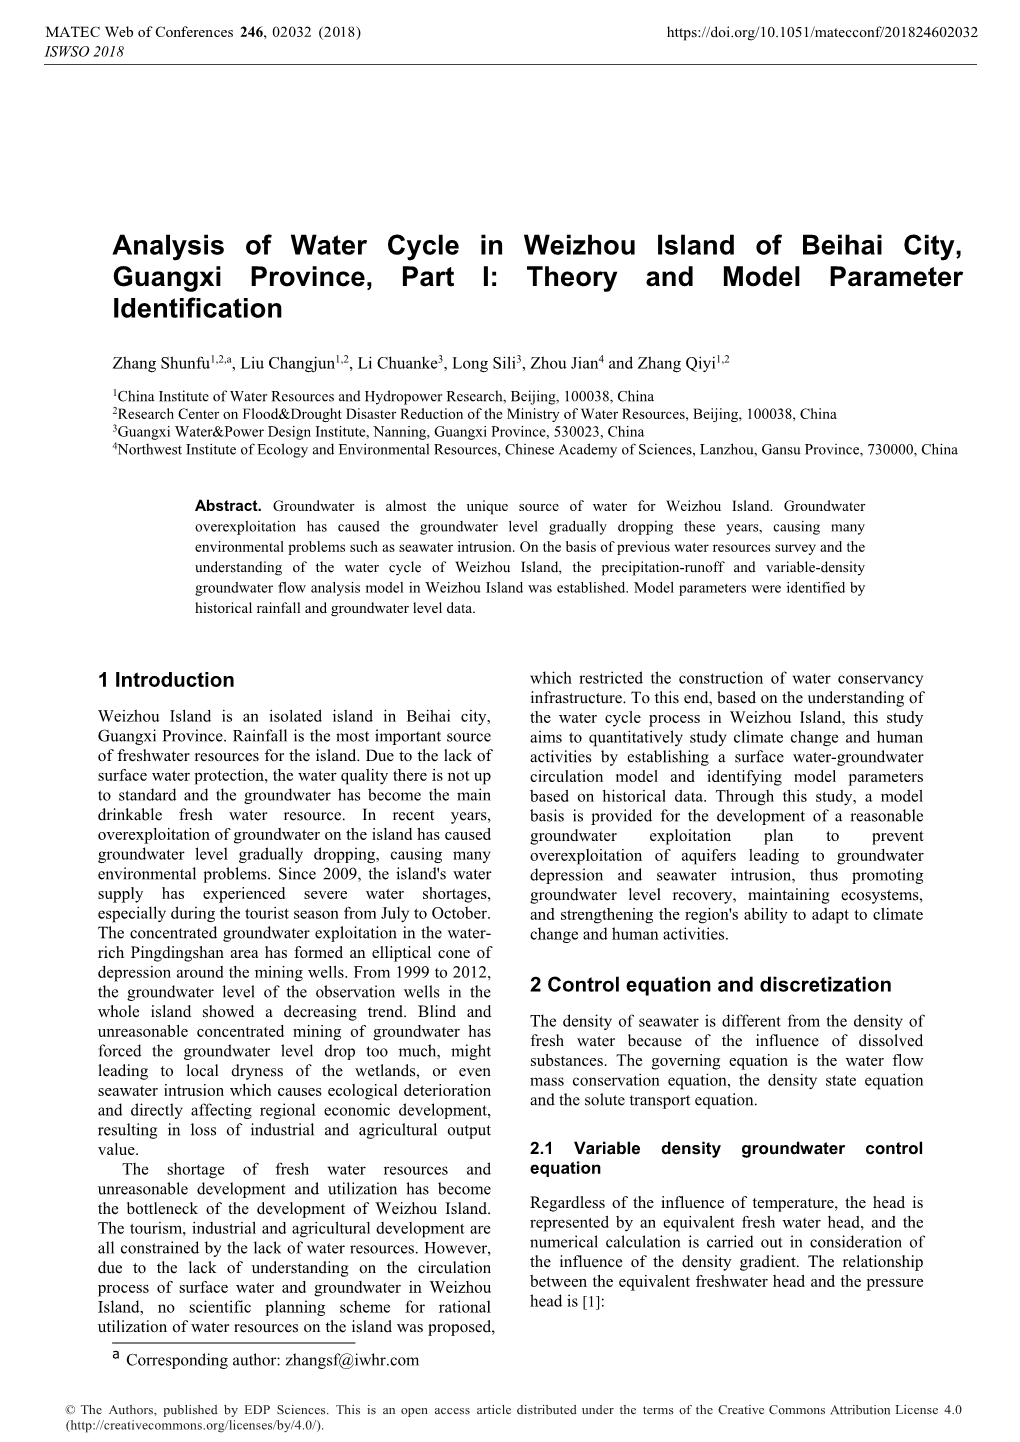 Analysis of Water Cycle in Weizhou Island of Beihai City, Guangxi Province, Part I: Theory and Model Parameter Identification